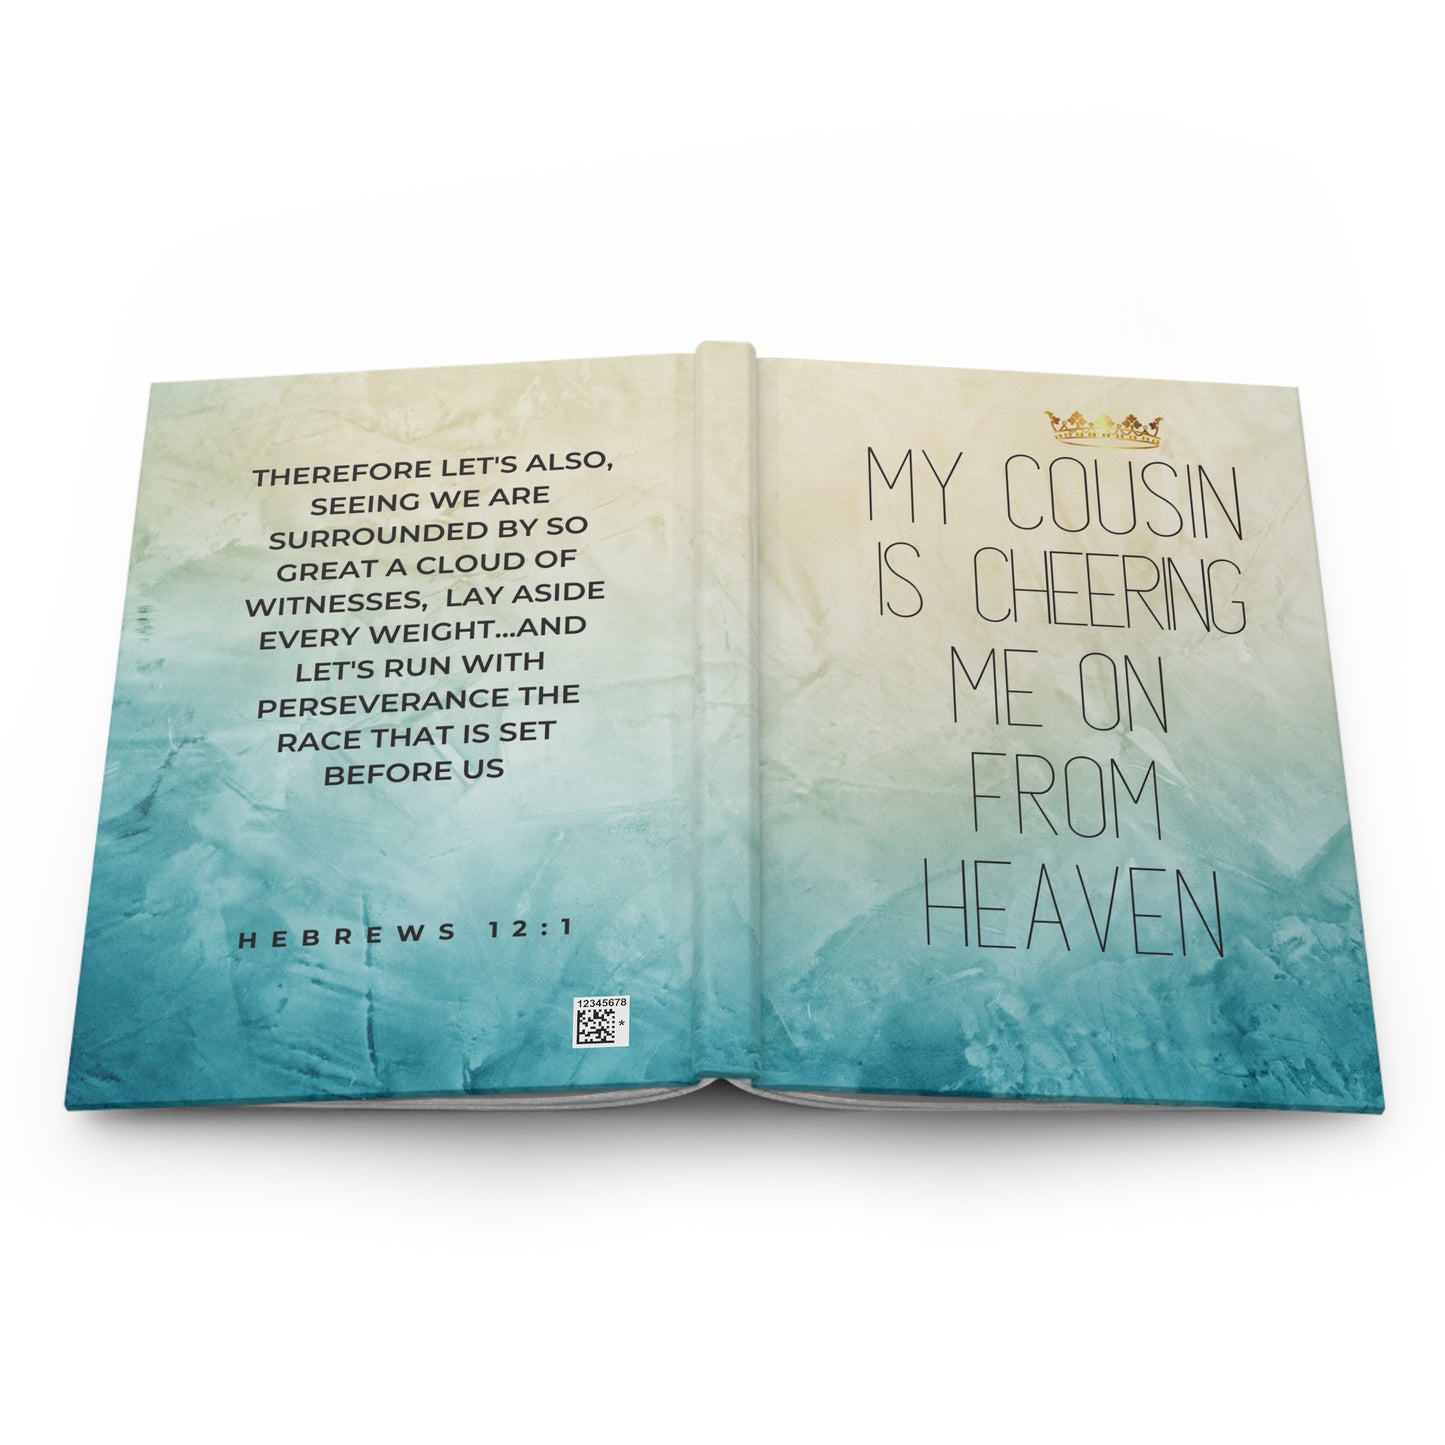 Grief Journal for Loss of Cousin, Cheering Me On From Heaven